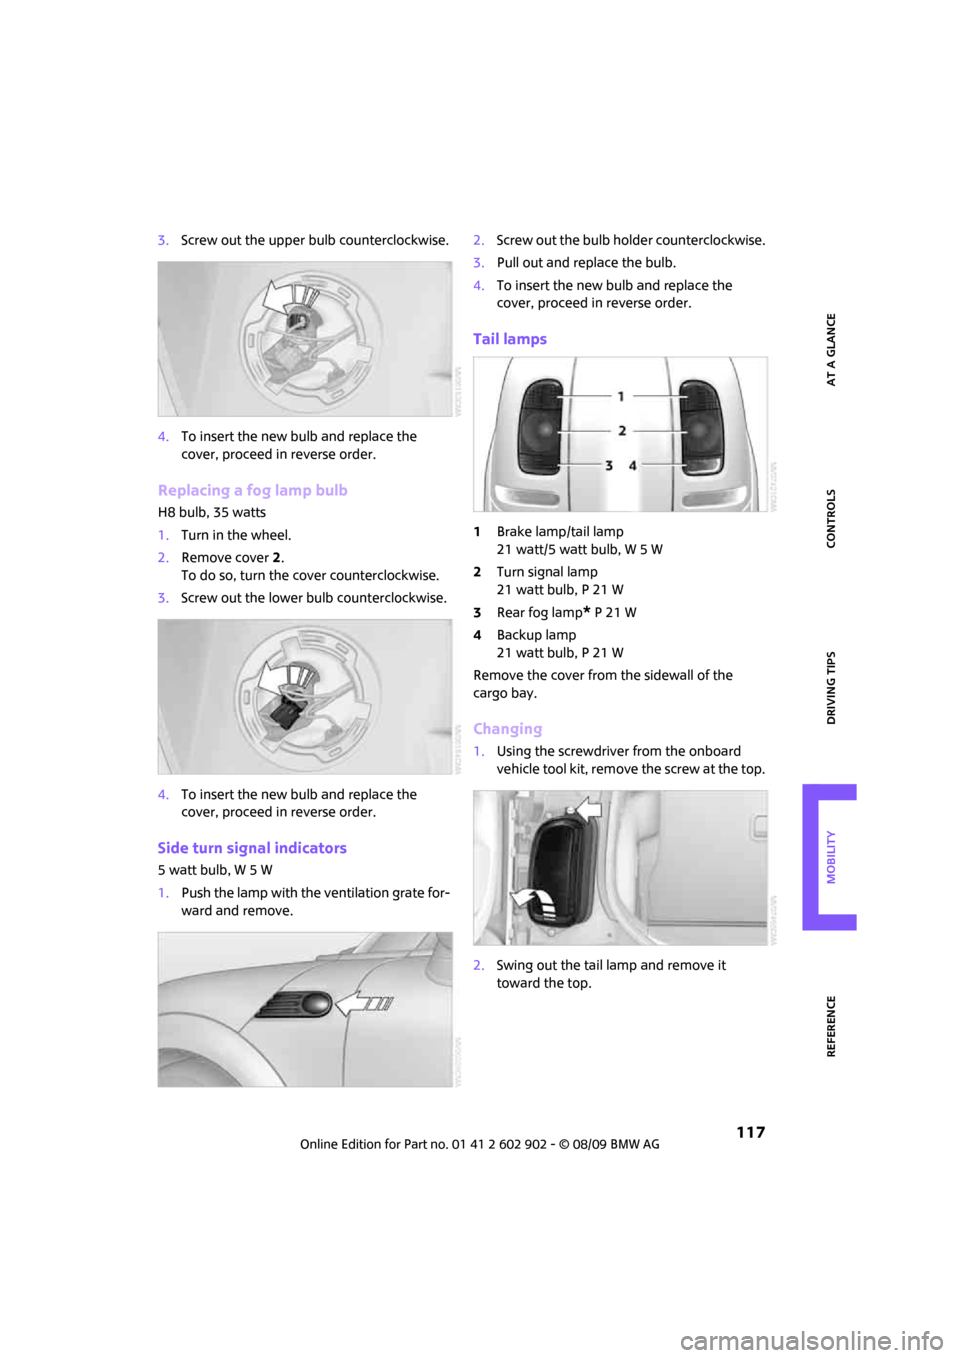 MINI Clubman 2010  Owners Manual REFERENCEAT A GLANCE CONTROLS DRIVING TIPS MOBILITY
 117
3.Screw out the upper bulb counterclockwise.
4.To insert the new bulb and replace the 
cover, proceed in reverse order.
Replacing a fog lamp bu